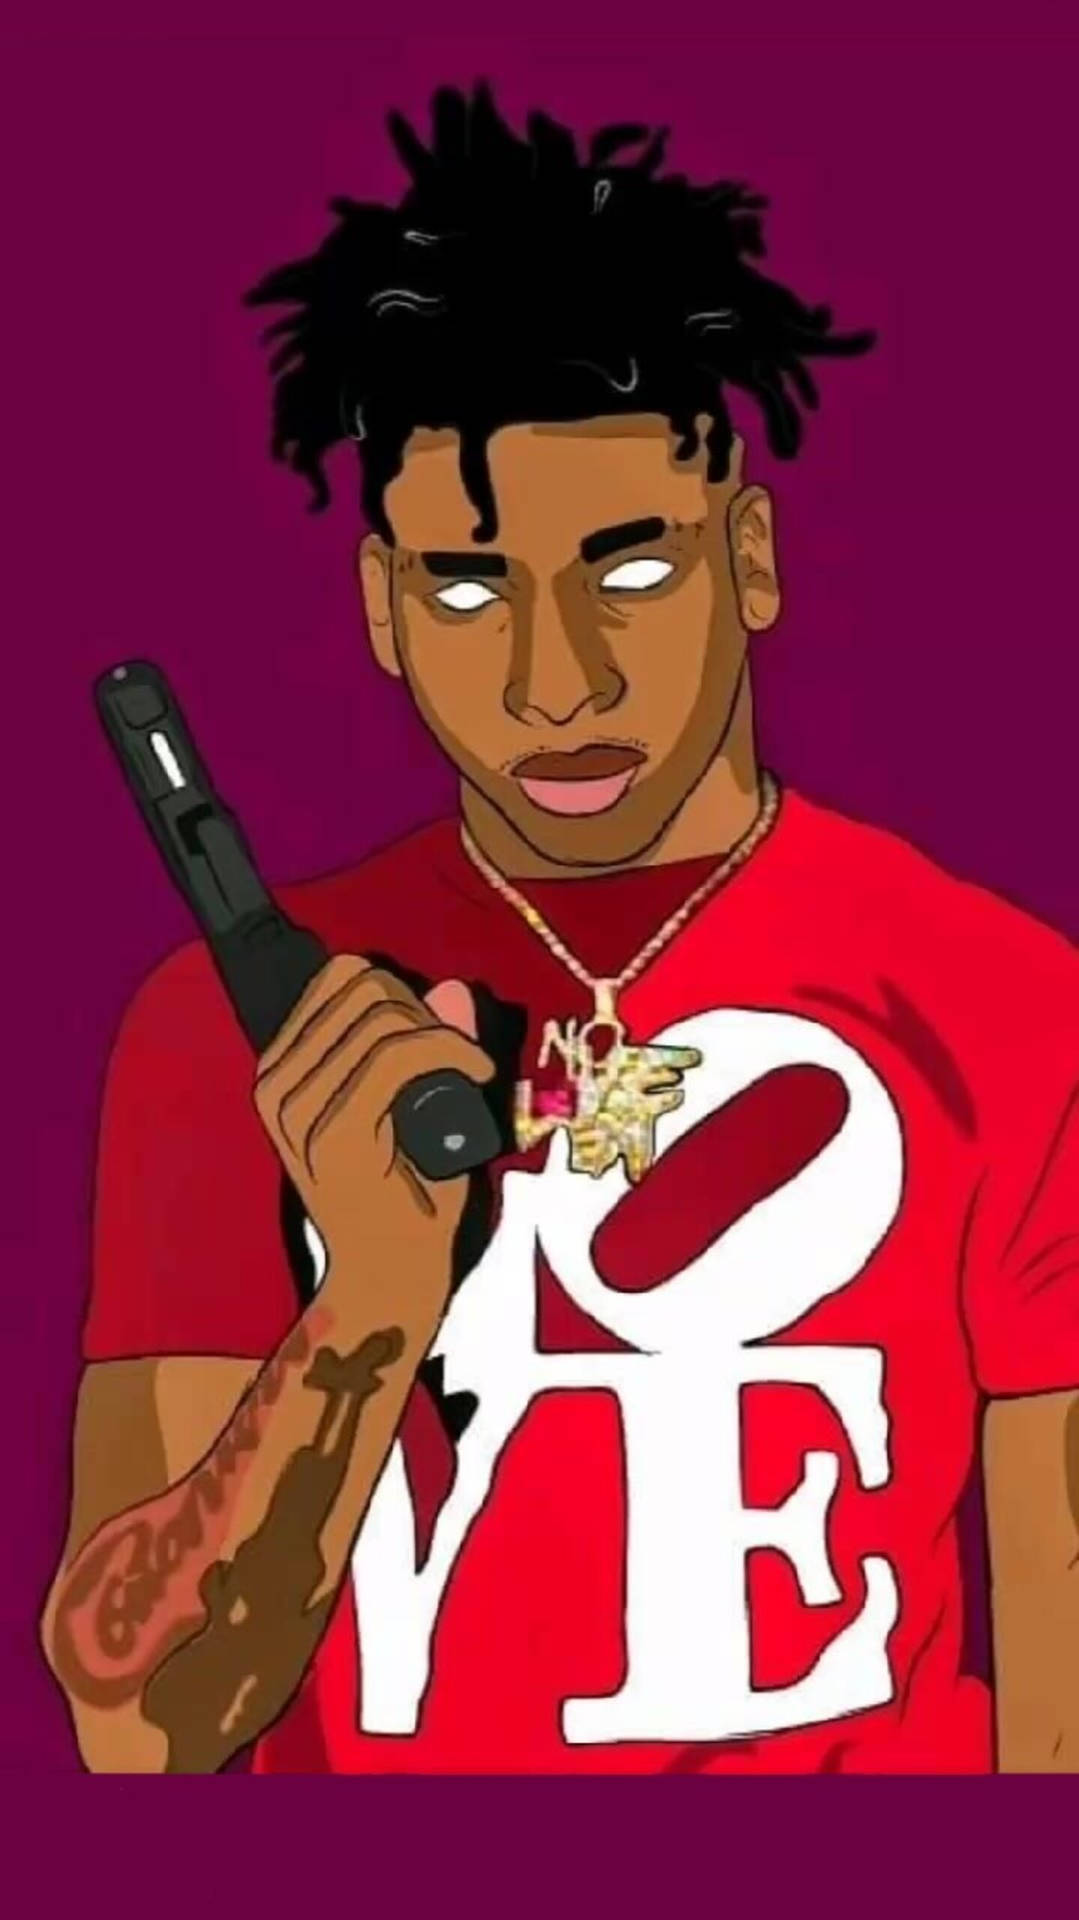 Nle Choppa Showing His Signature Sound With A Cartoonized Artwork. Background